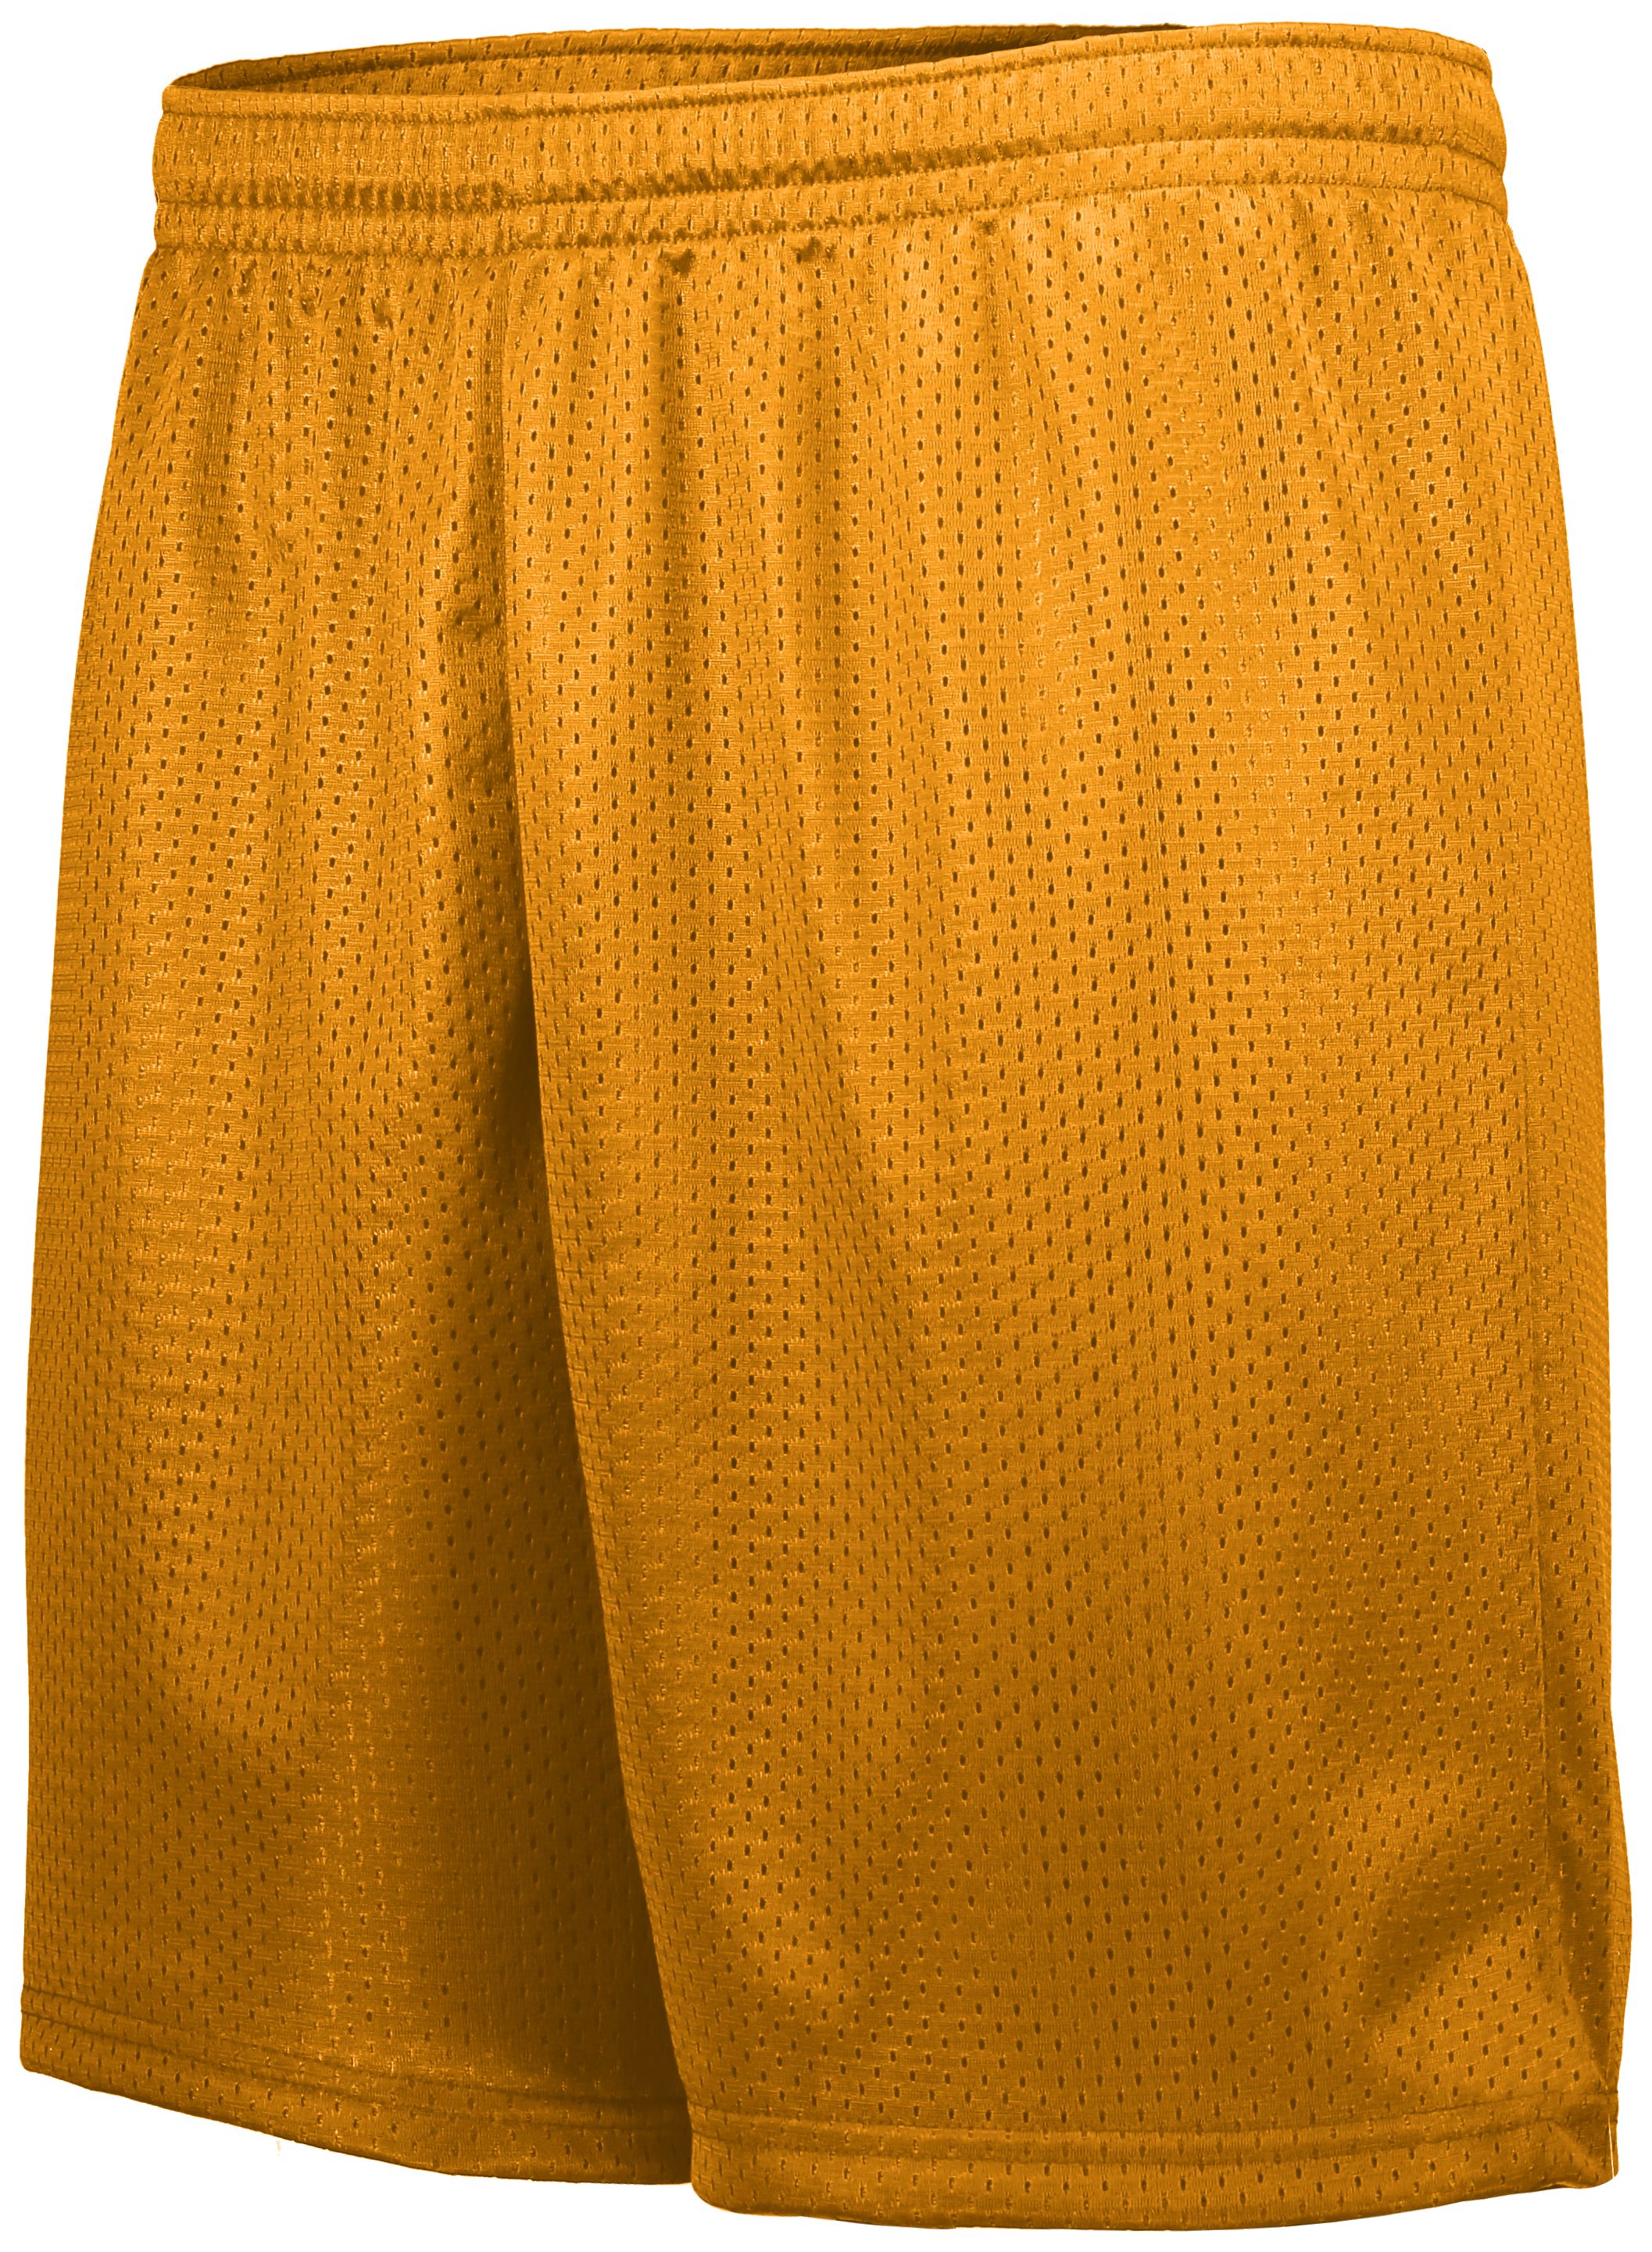 Augusta Sportswear Tricot Mesh Shorts in Gold  -Part of the Adult, Adult-Shorts, Augusta-Products product lines at KanaleyCreations.com